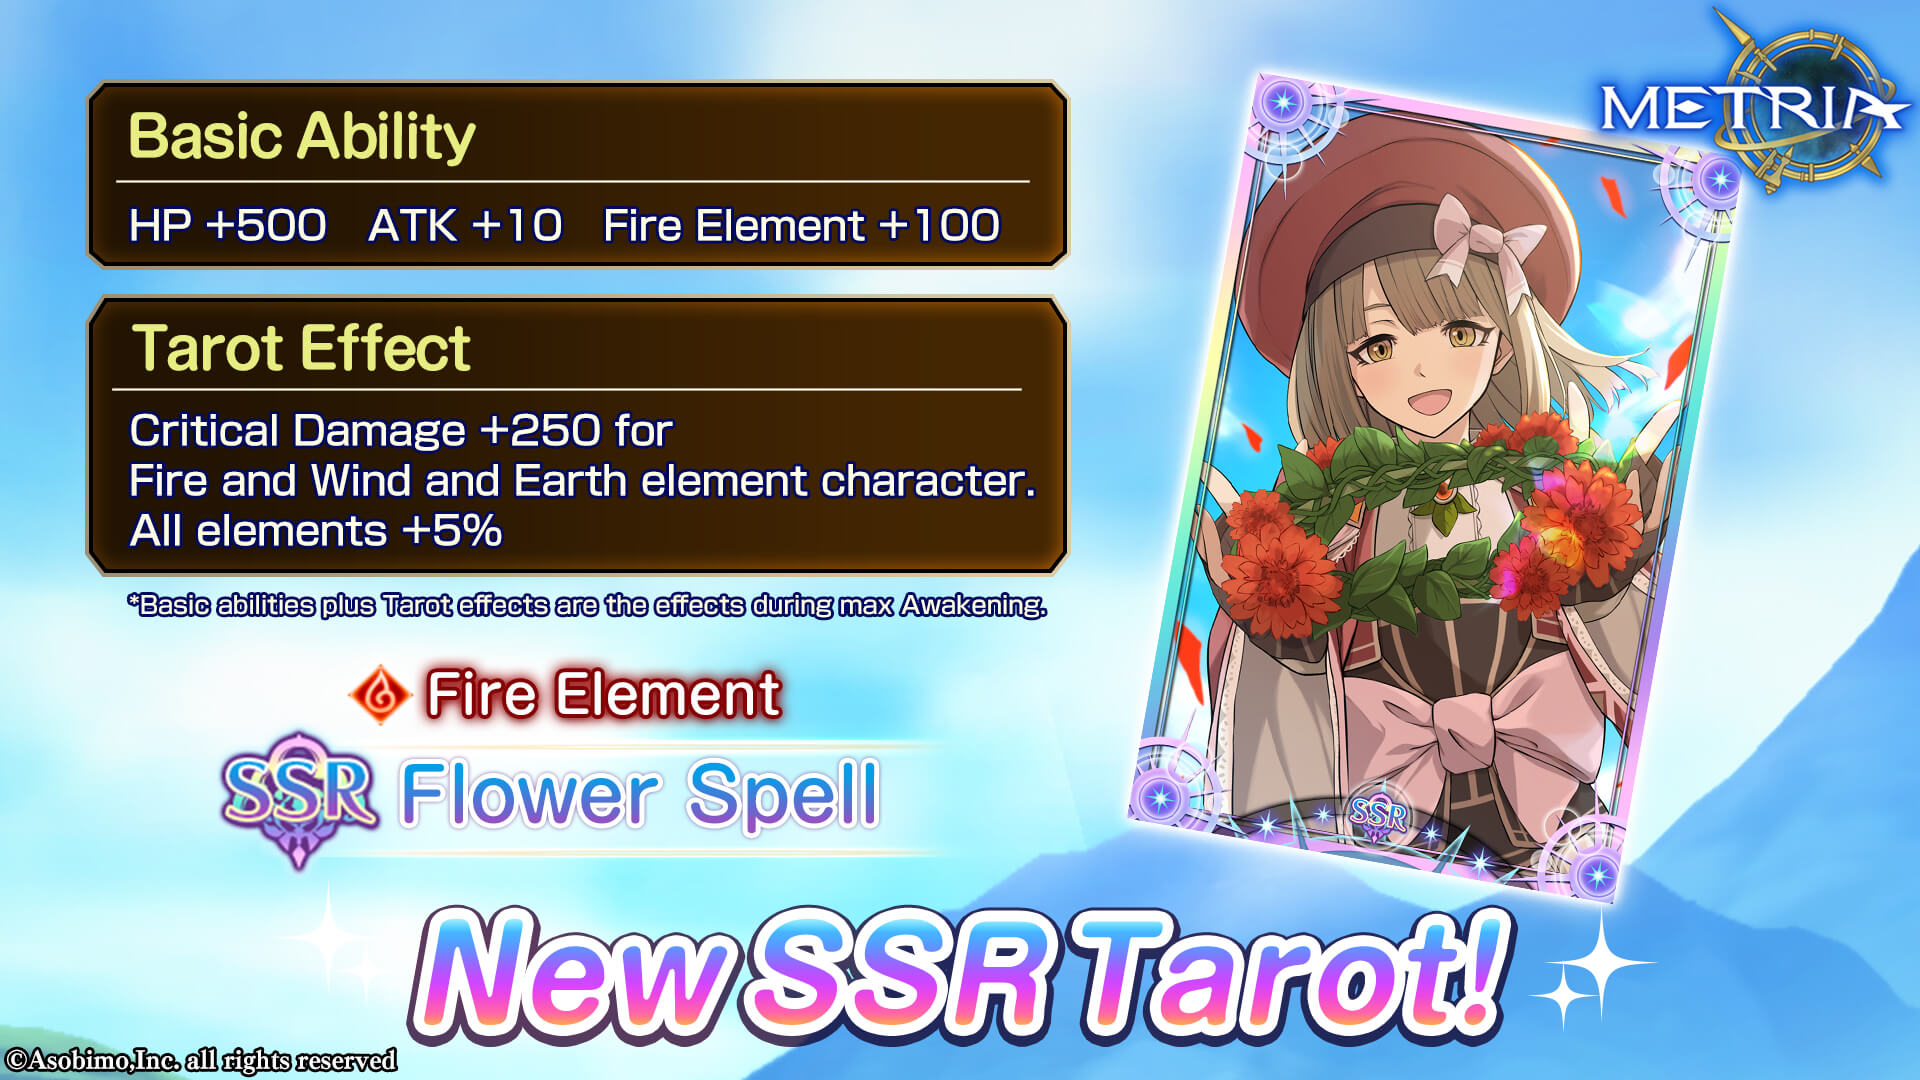 Fire Element New SSR Tarot: "Flower Spell" Available for Purchase!